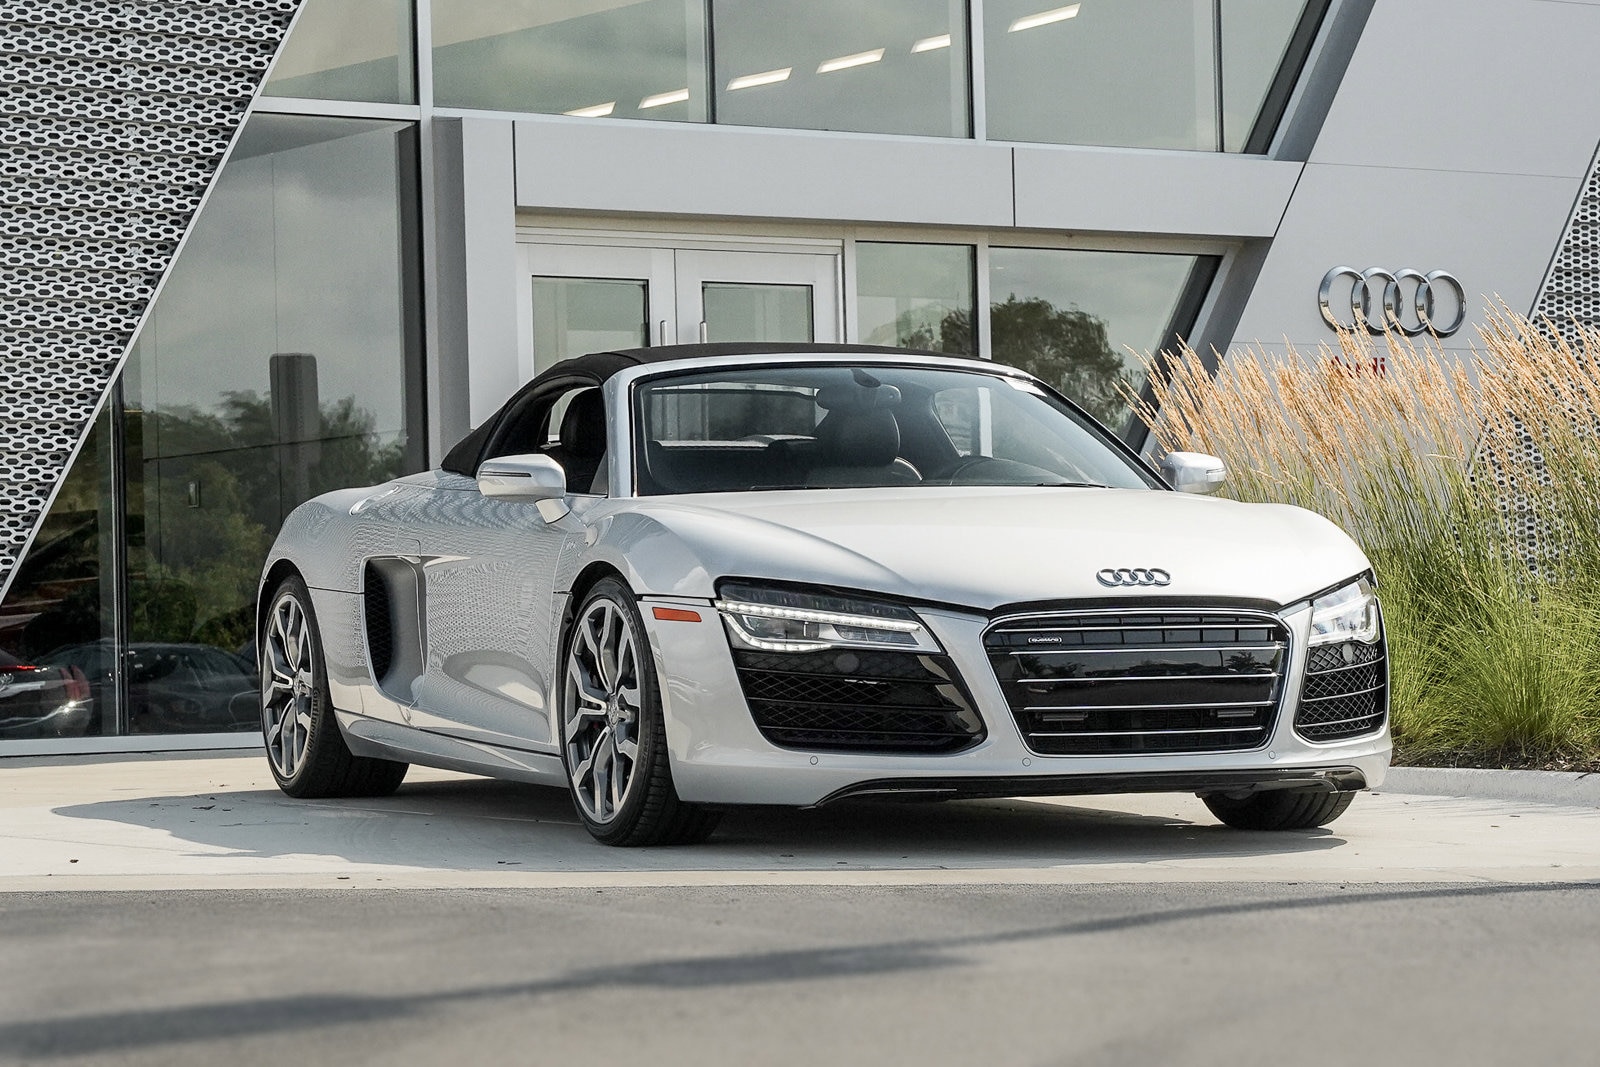 Used 2014 Audi R8 Base with VIN WUAVNAFG9EN000304 for sale in Saint Charles, IL